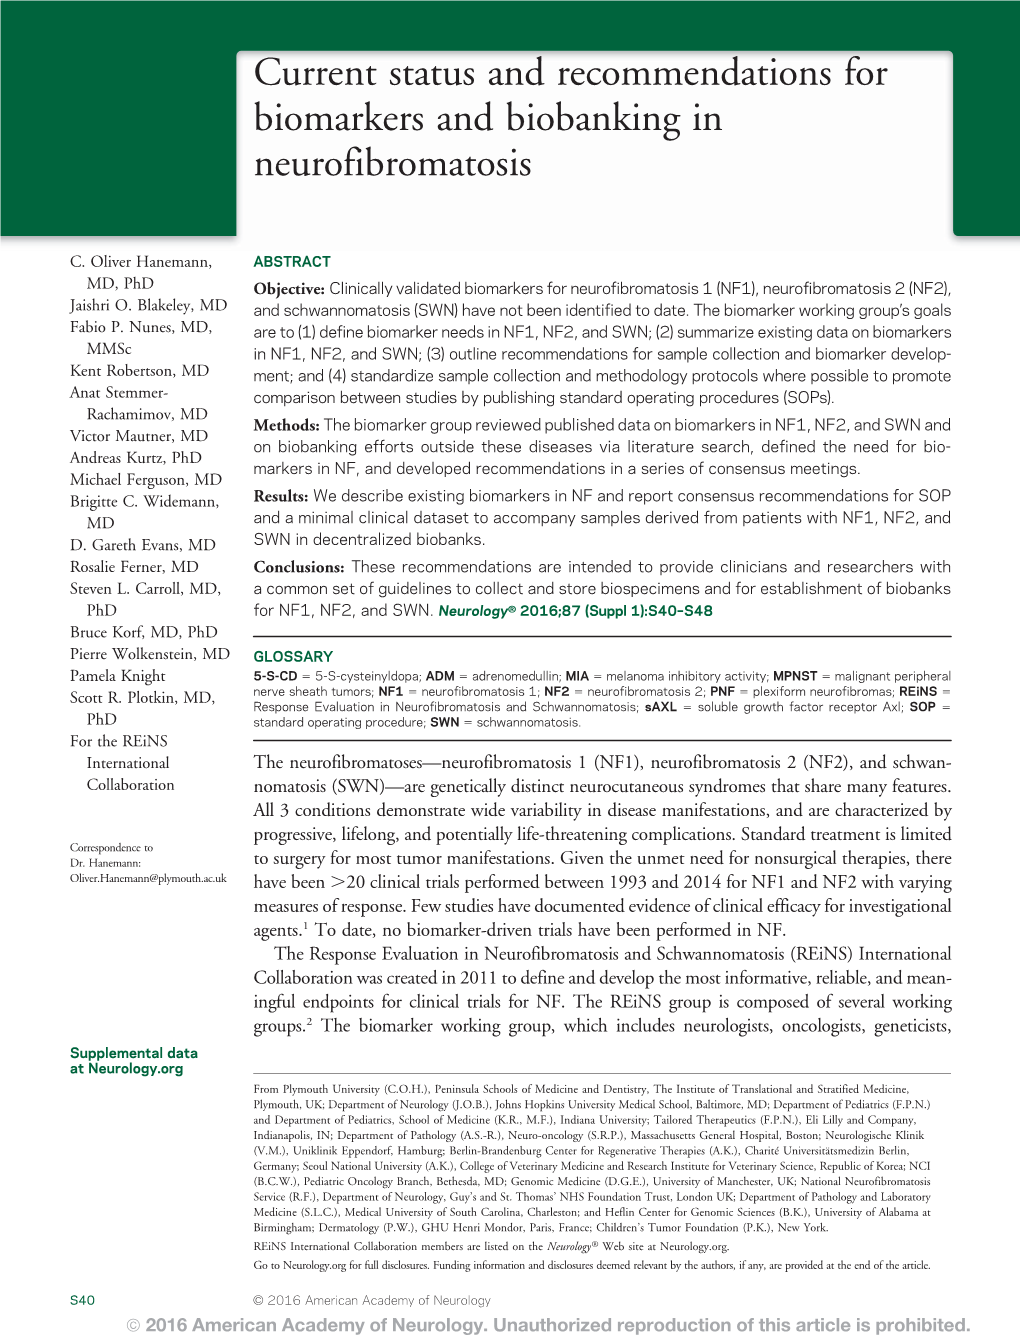 Current Status and Recommendations for Biomarkers and Biobanking in Neurofibromatosis